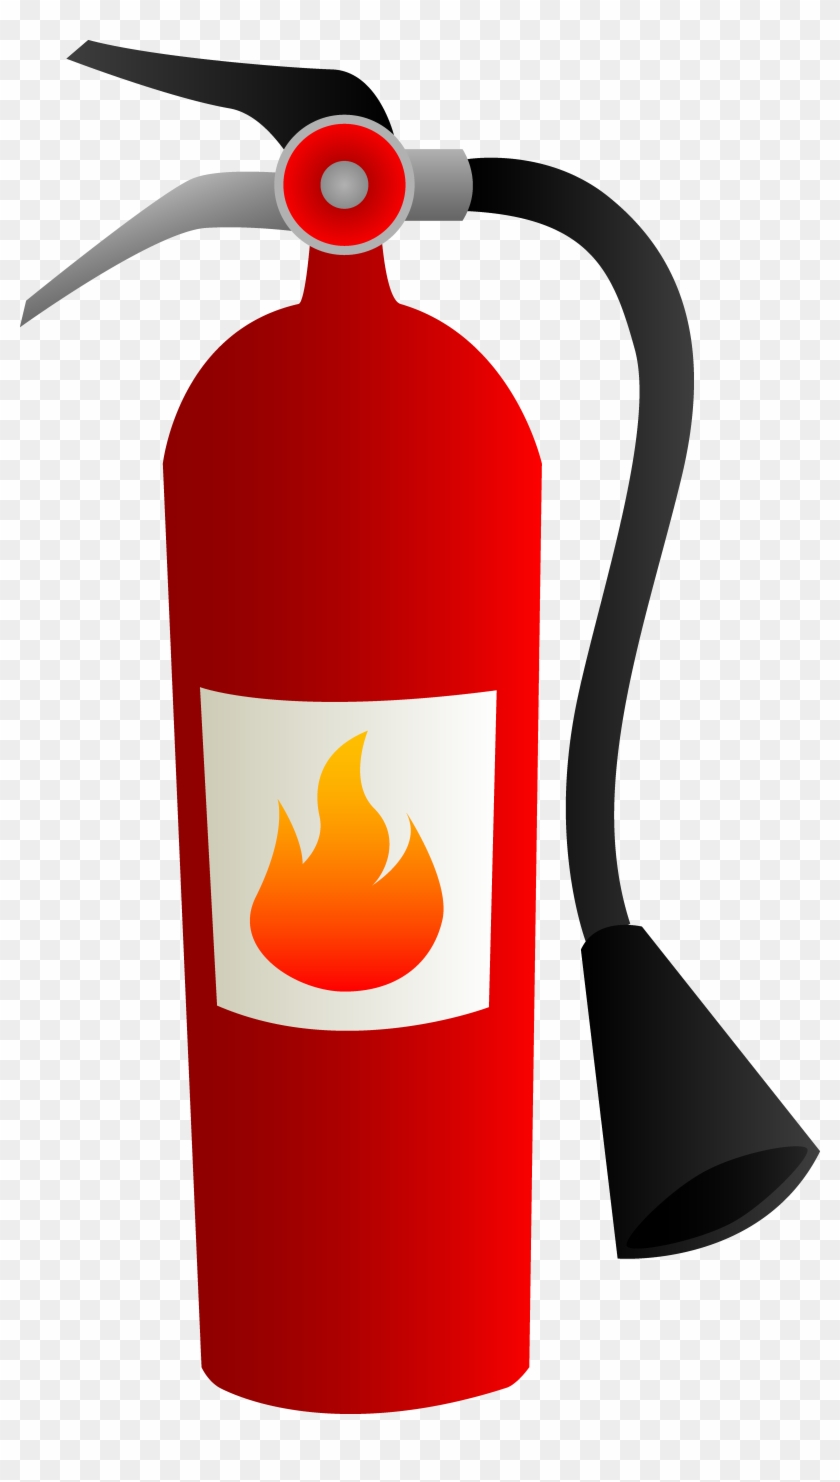 Fire Safety Clipart - Fire Safety Clipart #258316